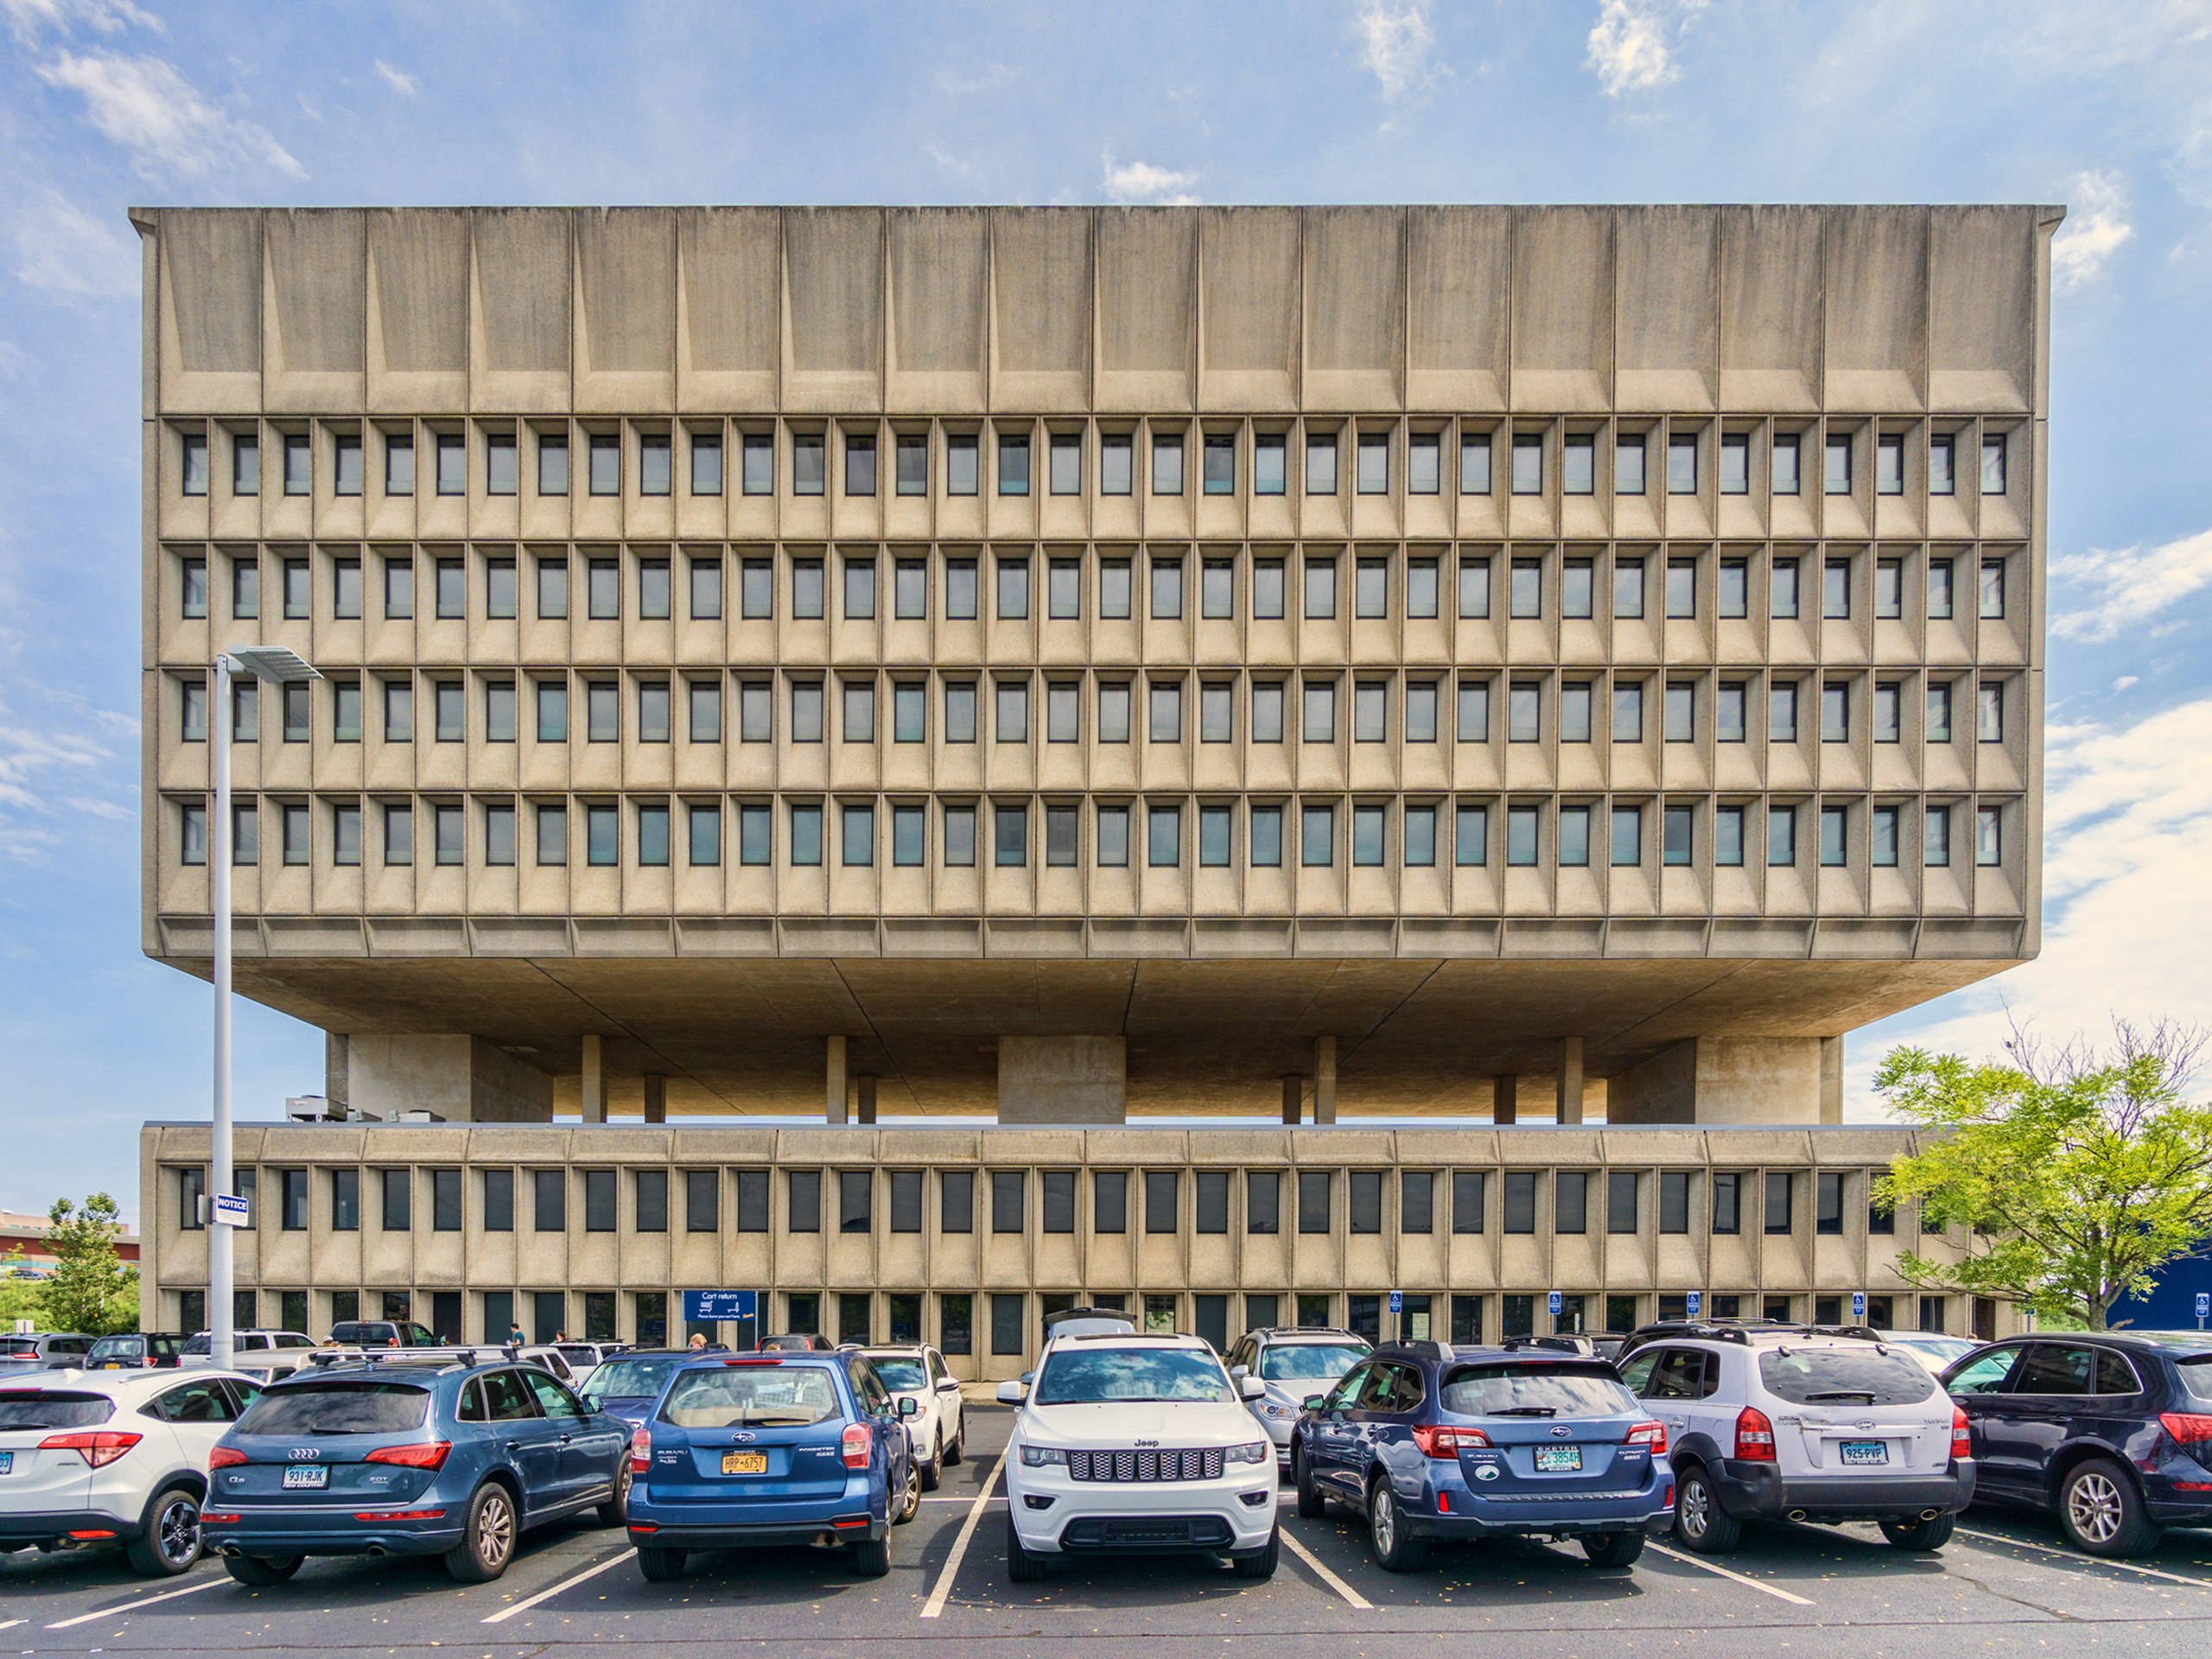 The Pirelli Tire Building, a concrete combed building with two hemispheres